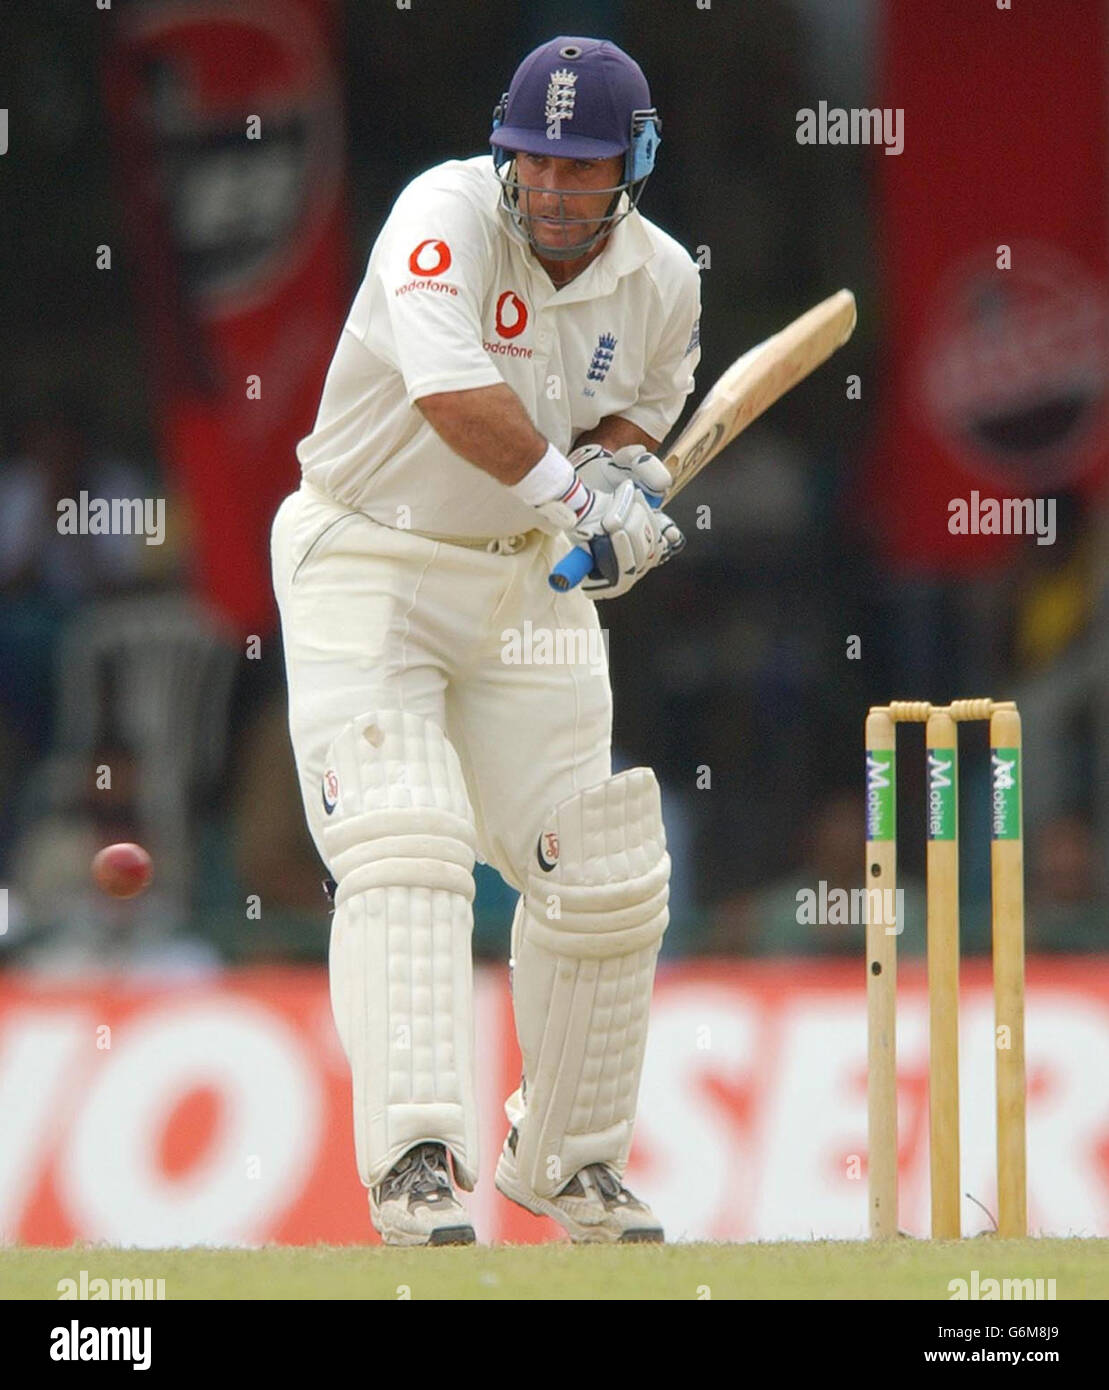 Graham Thorpe in action as England continued their first innings against Sri Lanka at the Asgiriya Stadium in Kandy on the third day of the second Test in the three match series. Stock Photo